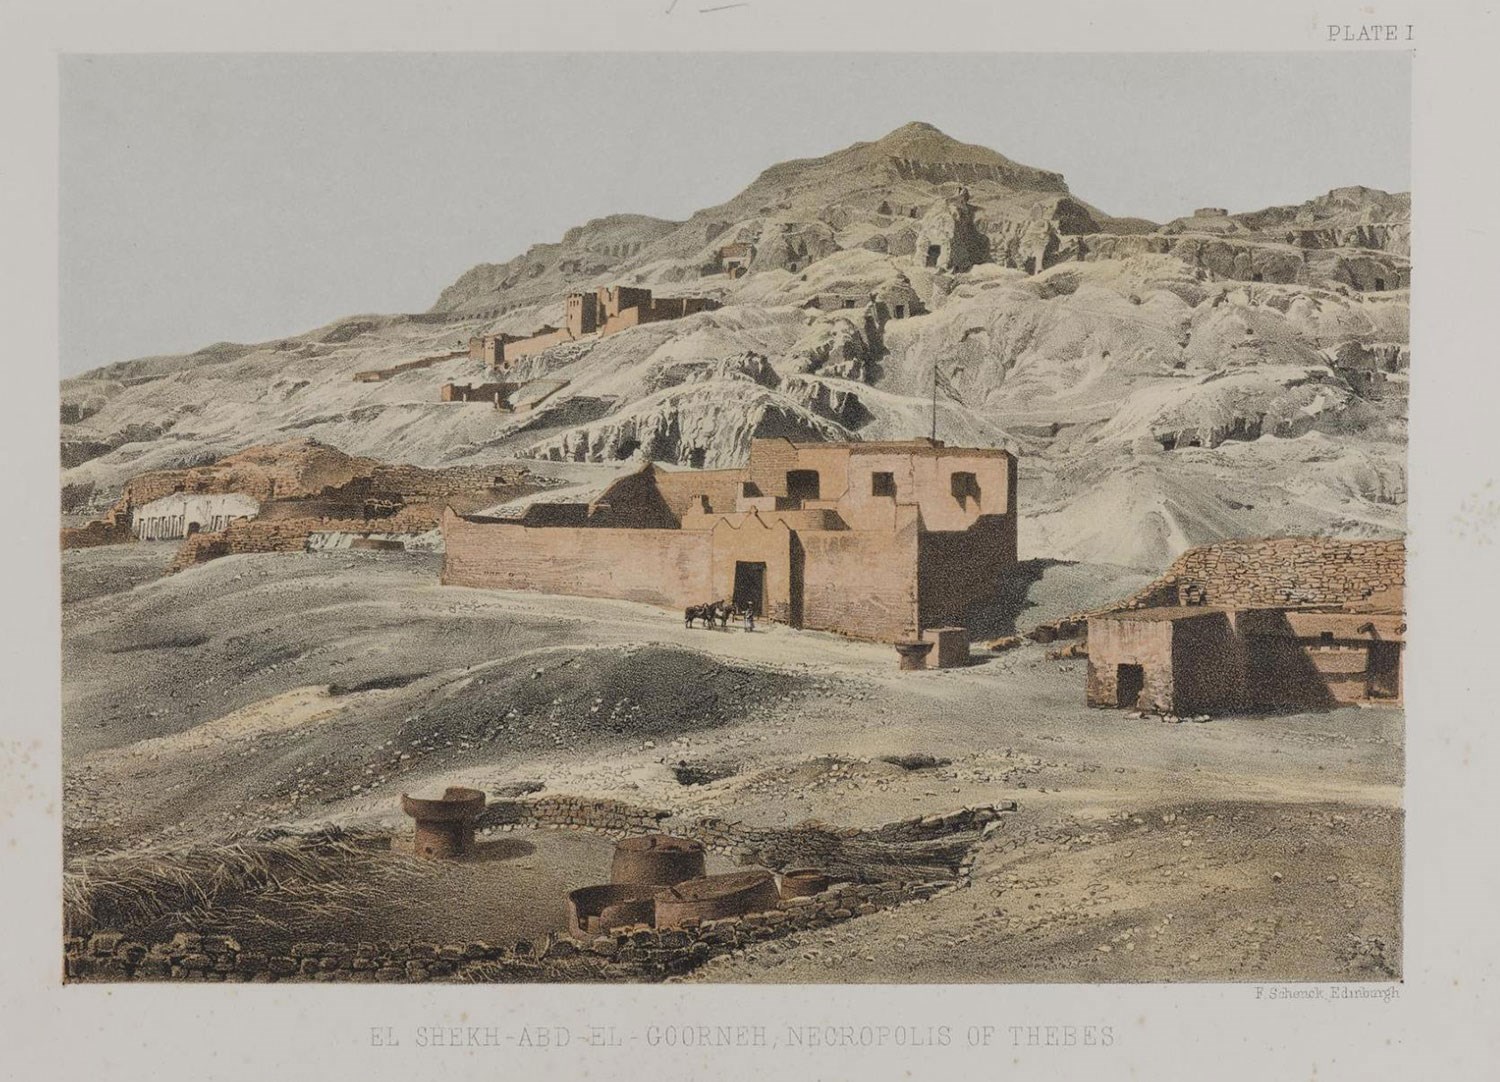 The Tombs of the Nobles and the house where Alexander Henry Rhind stayed during his excavations at Sheikh Abd el-Qurna, Theban West Bank (Luxor), from his book Thebes, Its Tombs and their Tenants, Ancient and Present (1862).